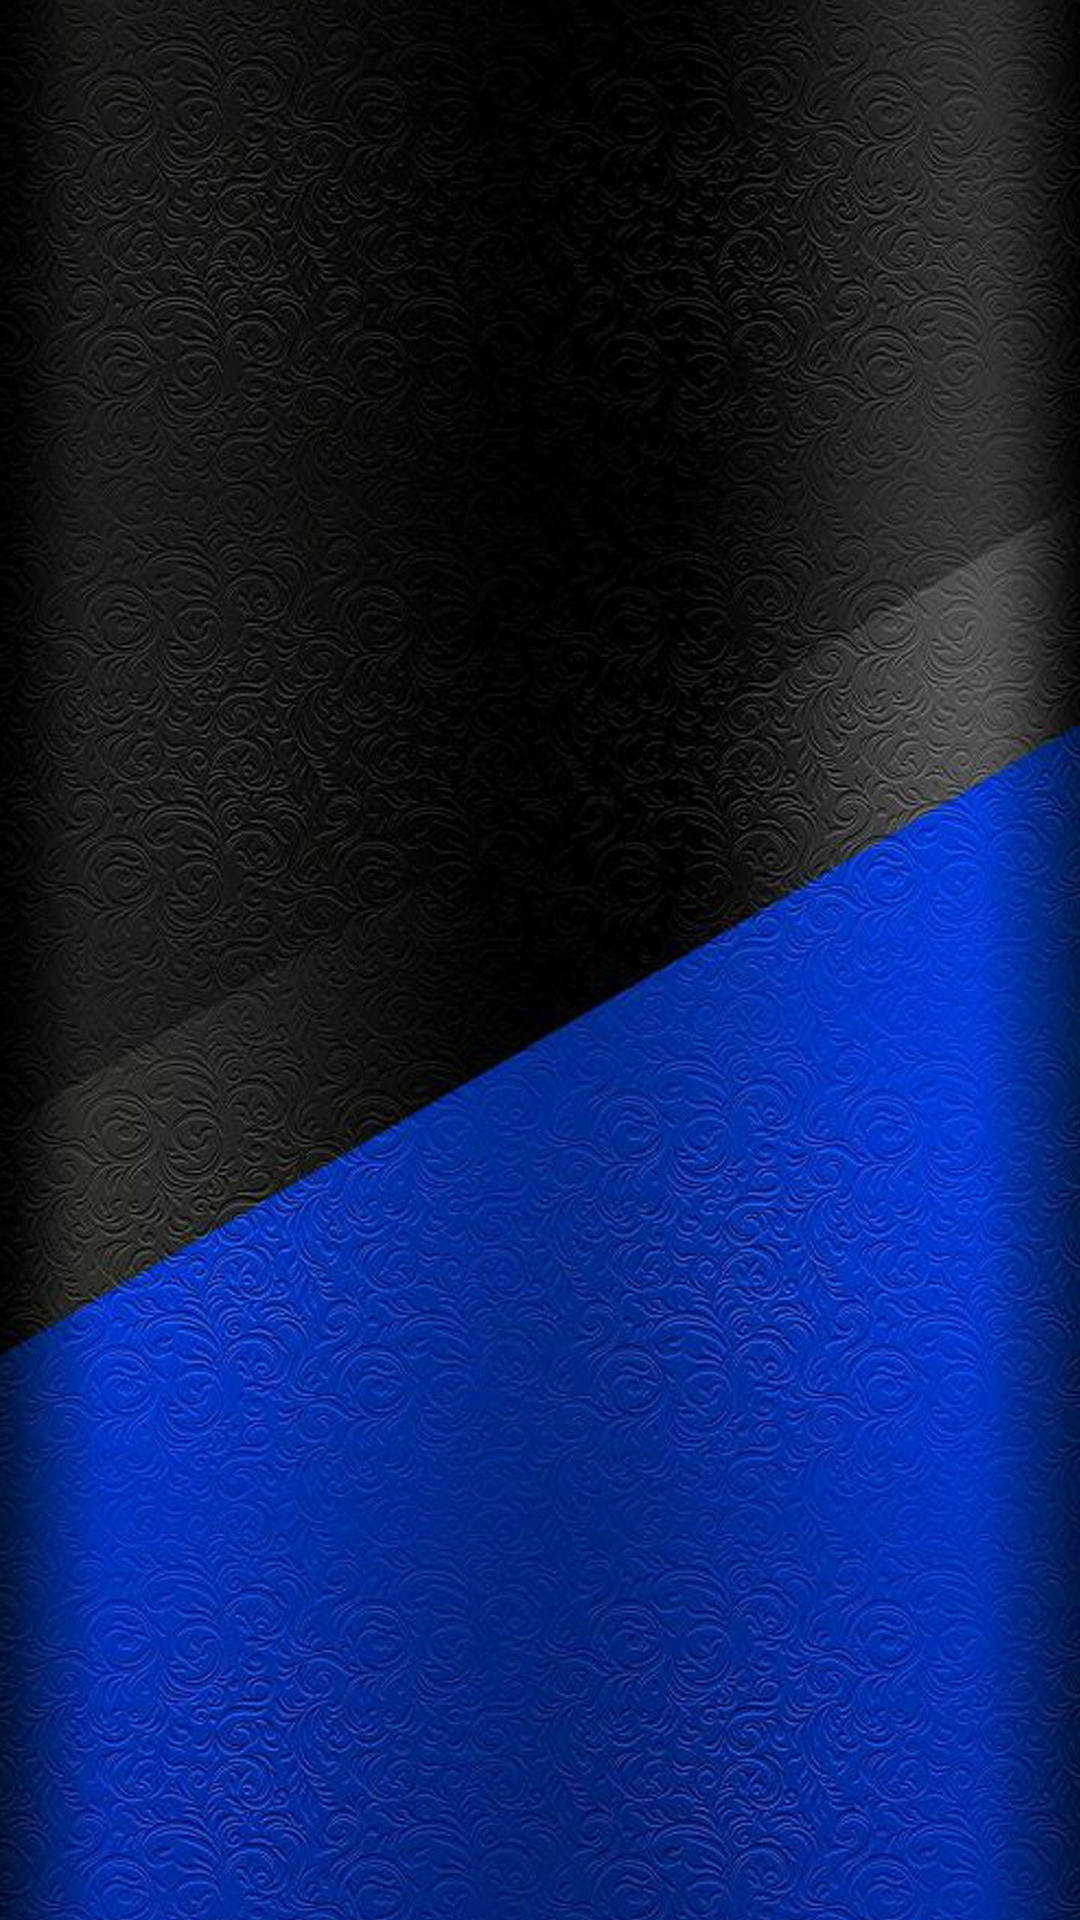 Samsung Galaxy S7 Edge Black And Blue Textured Picture